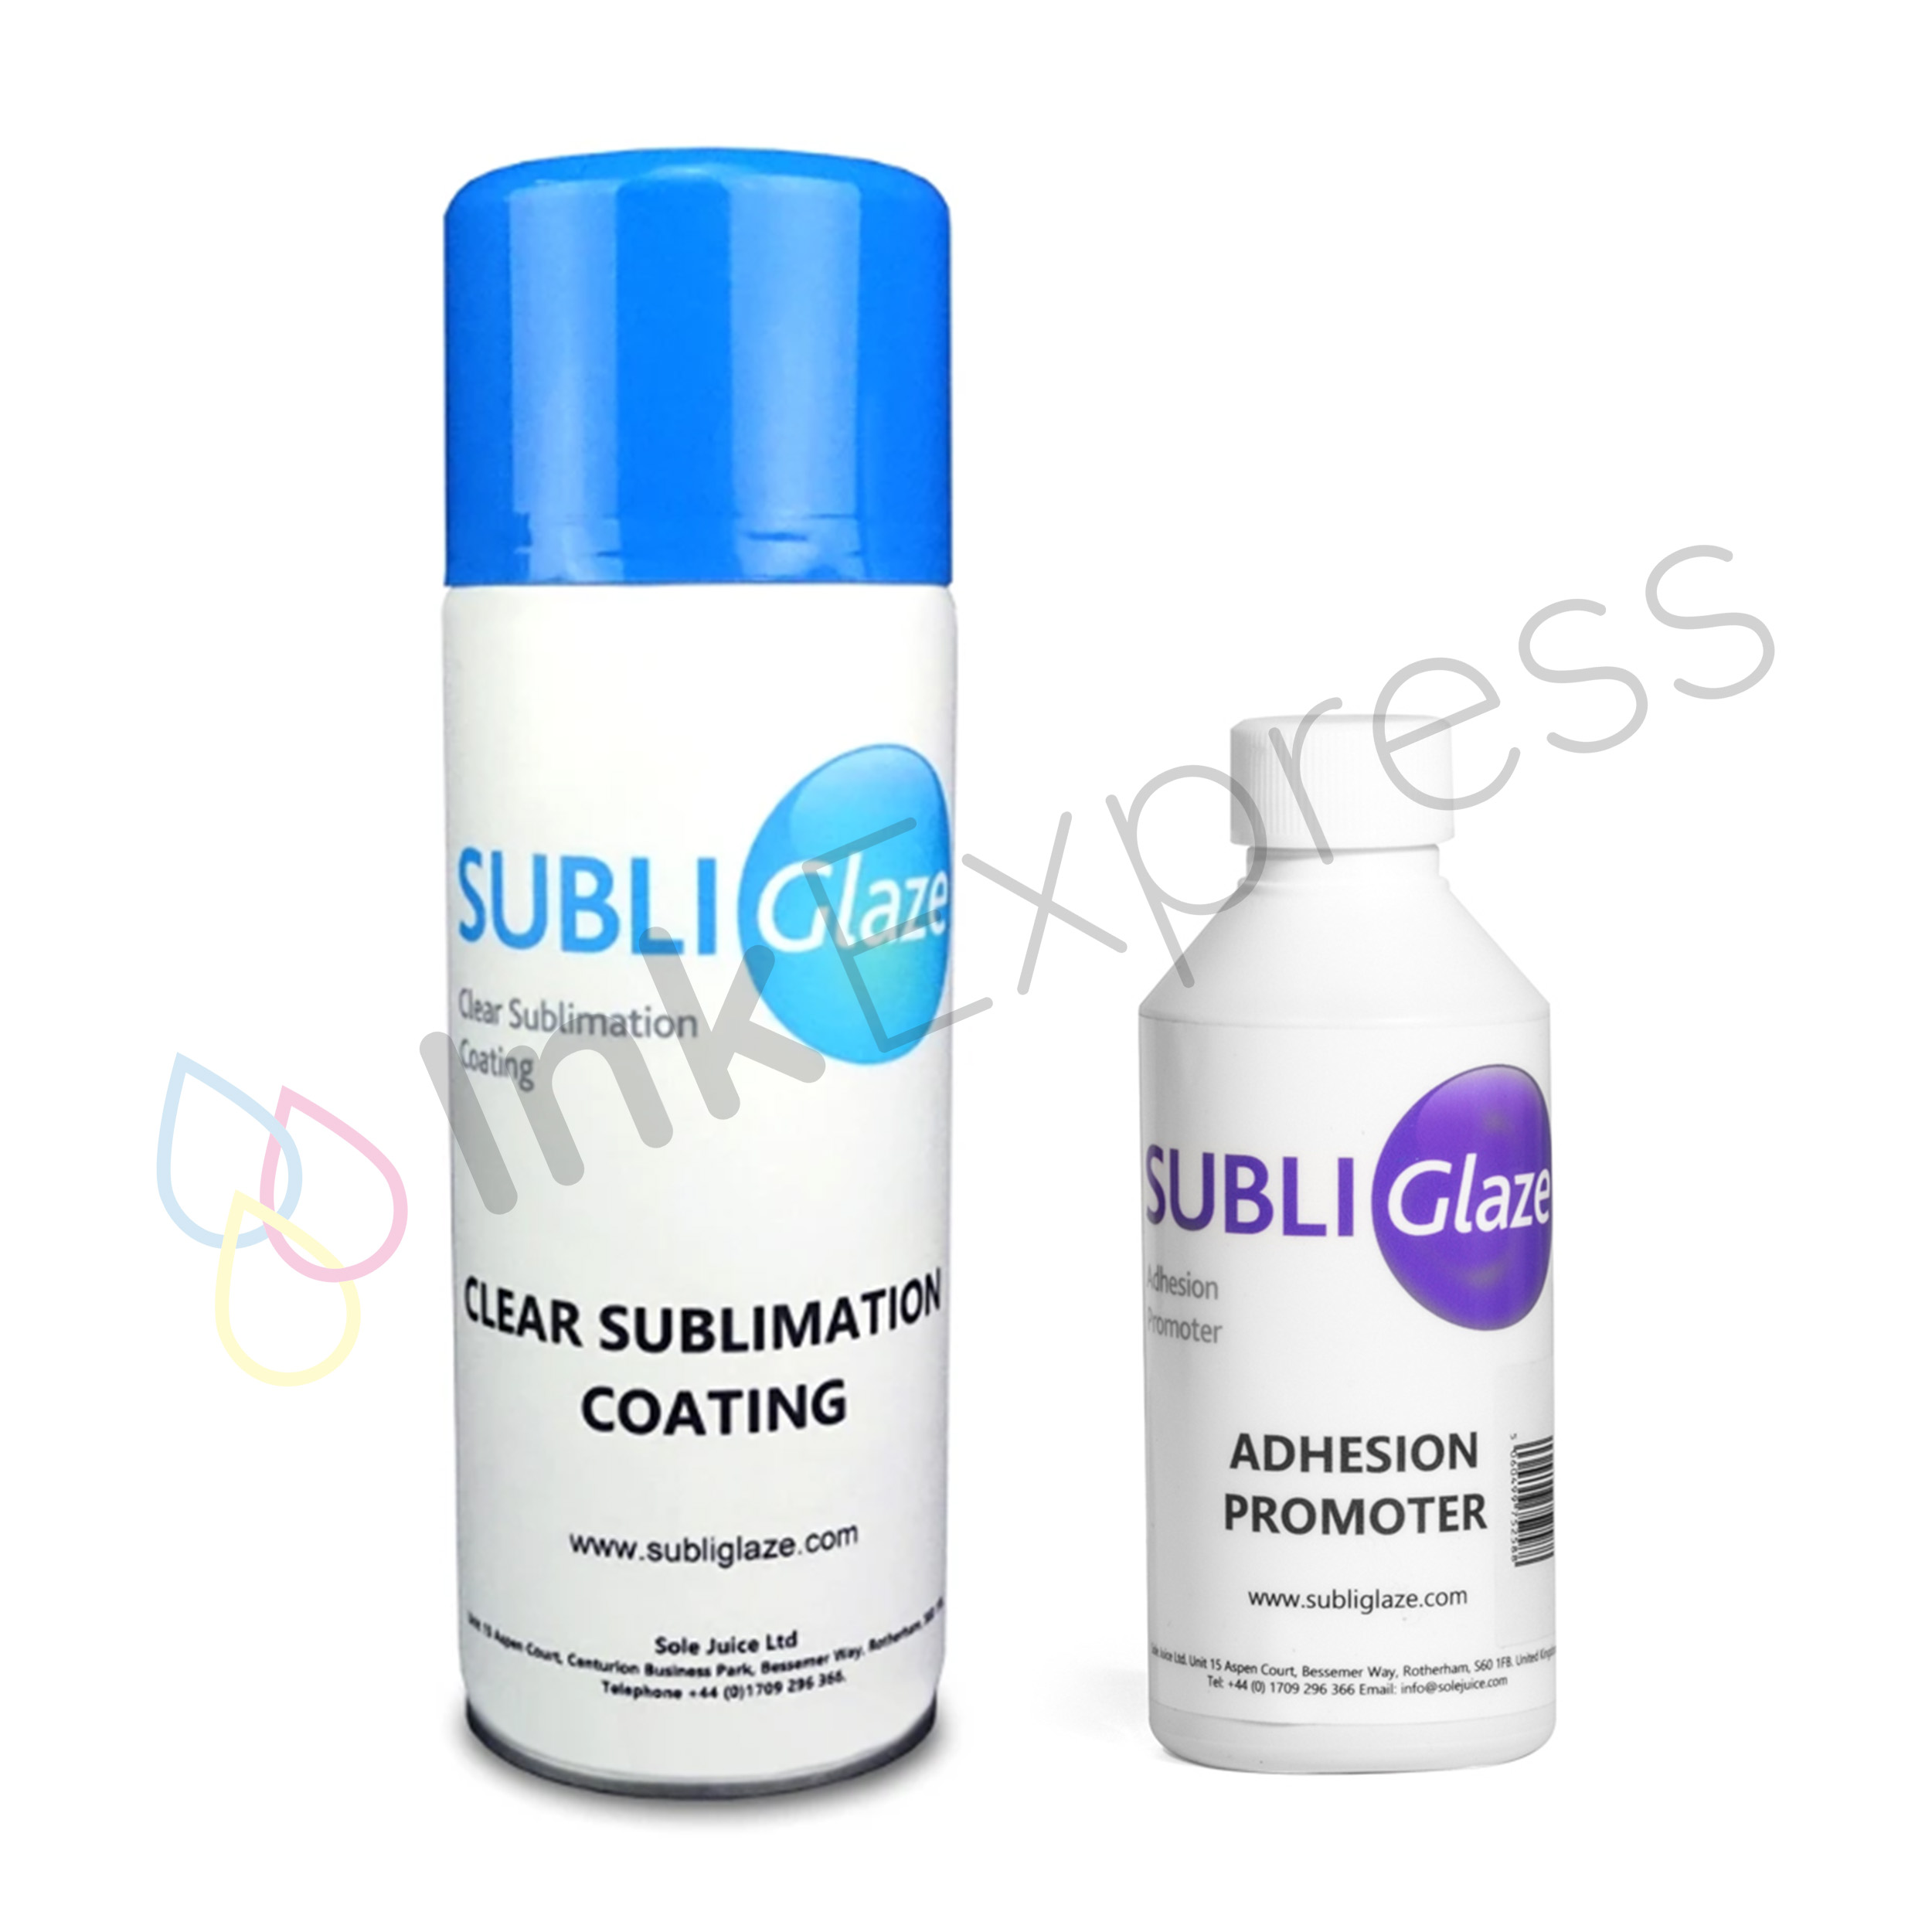 Subli Glaze Sublimation Coating Spray Twin Pack - Clear & Adhesion Promoter  400ml / 250ml